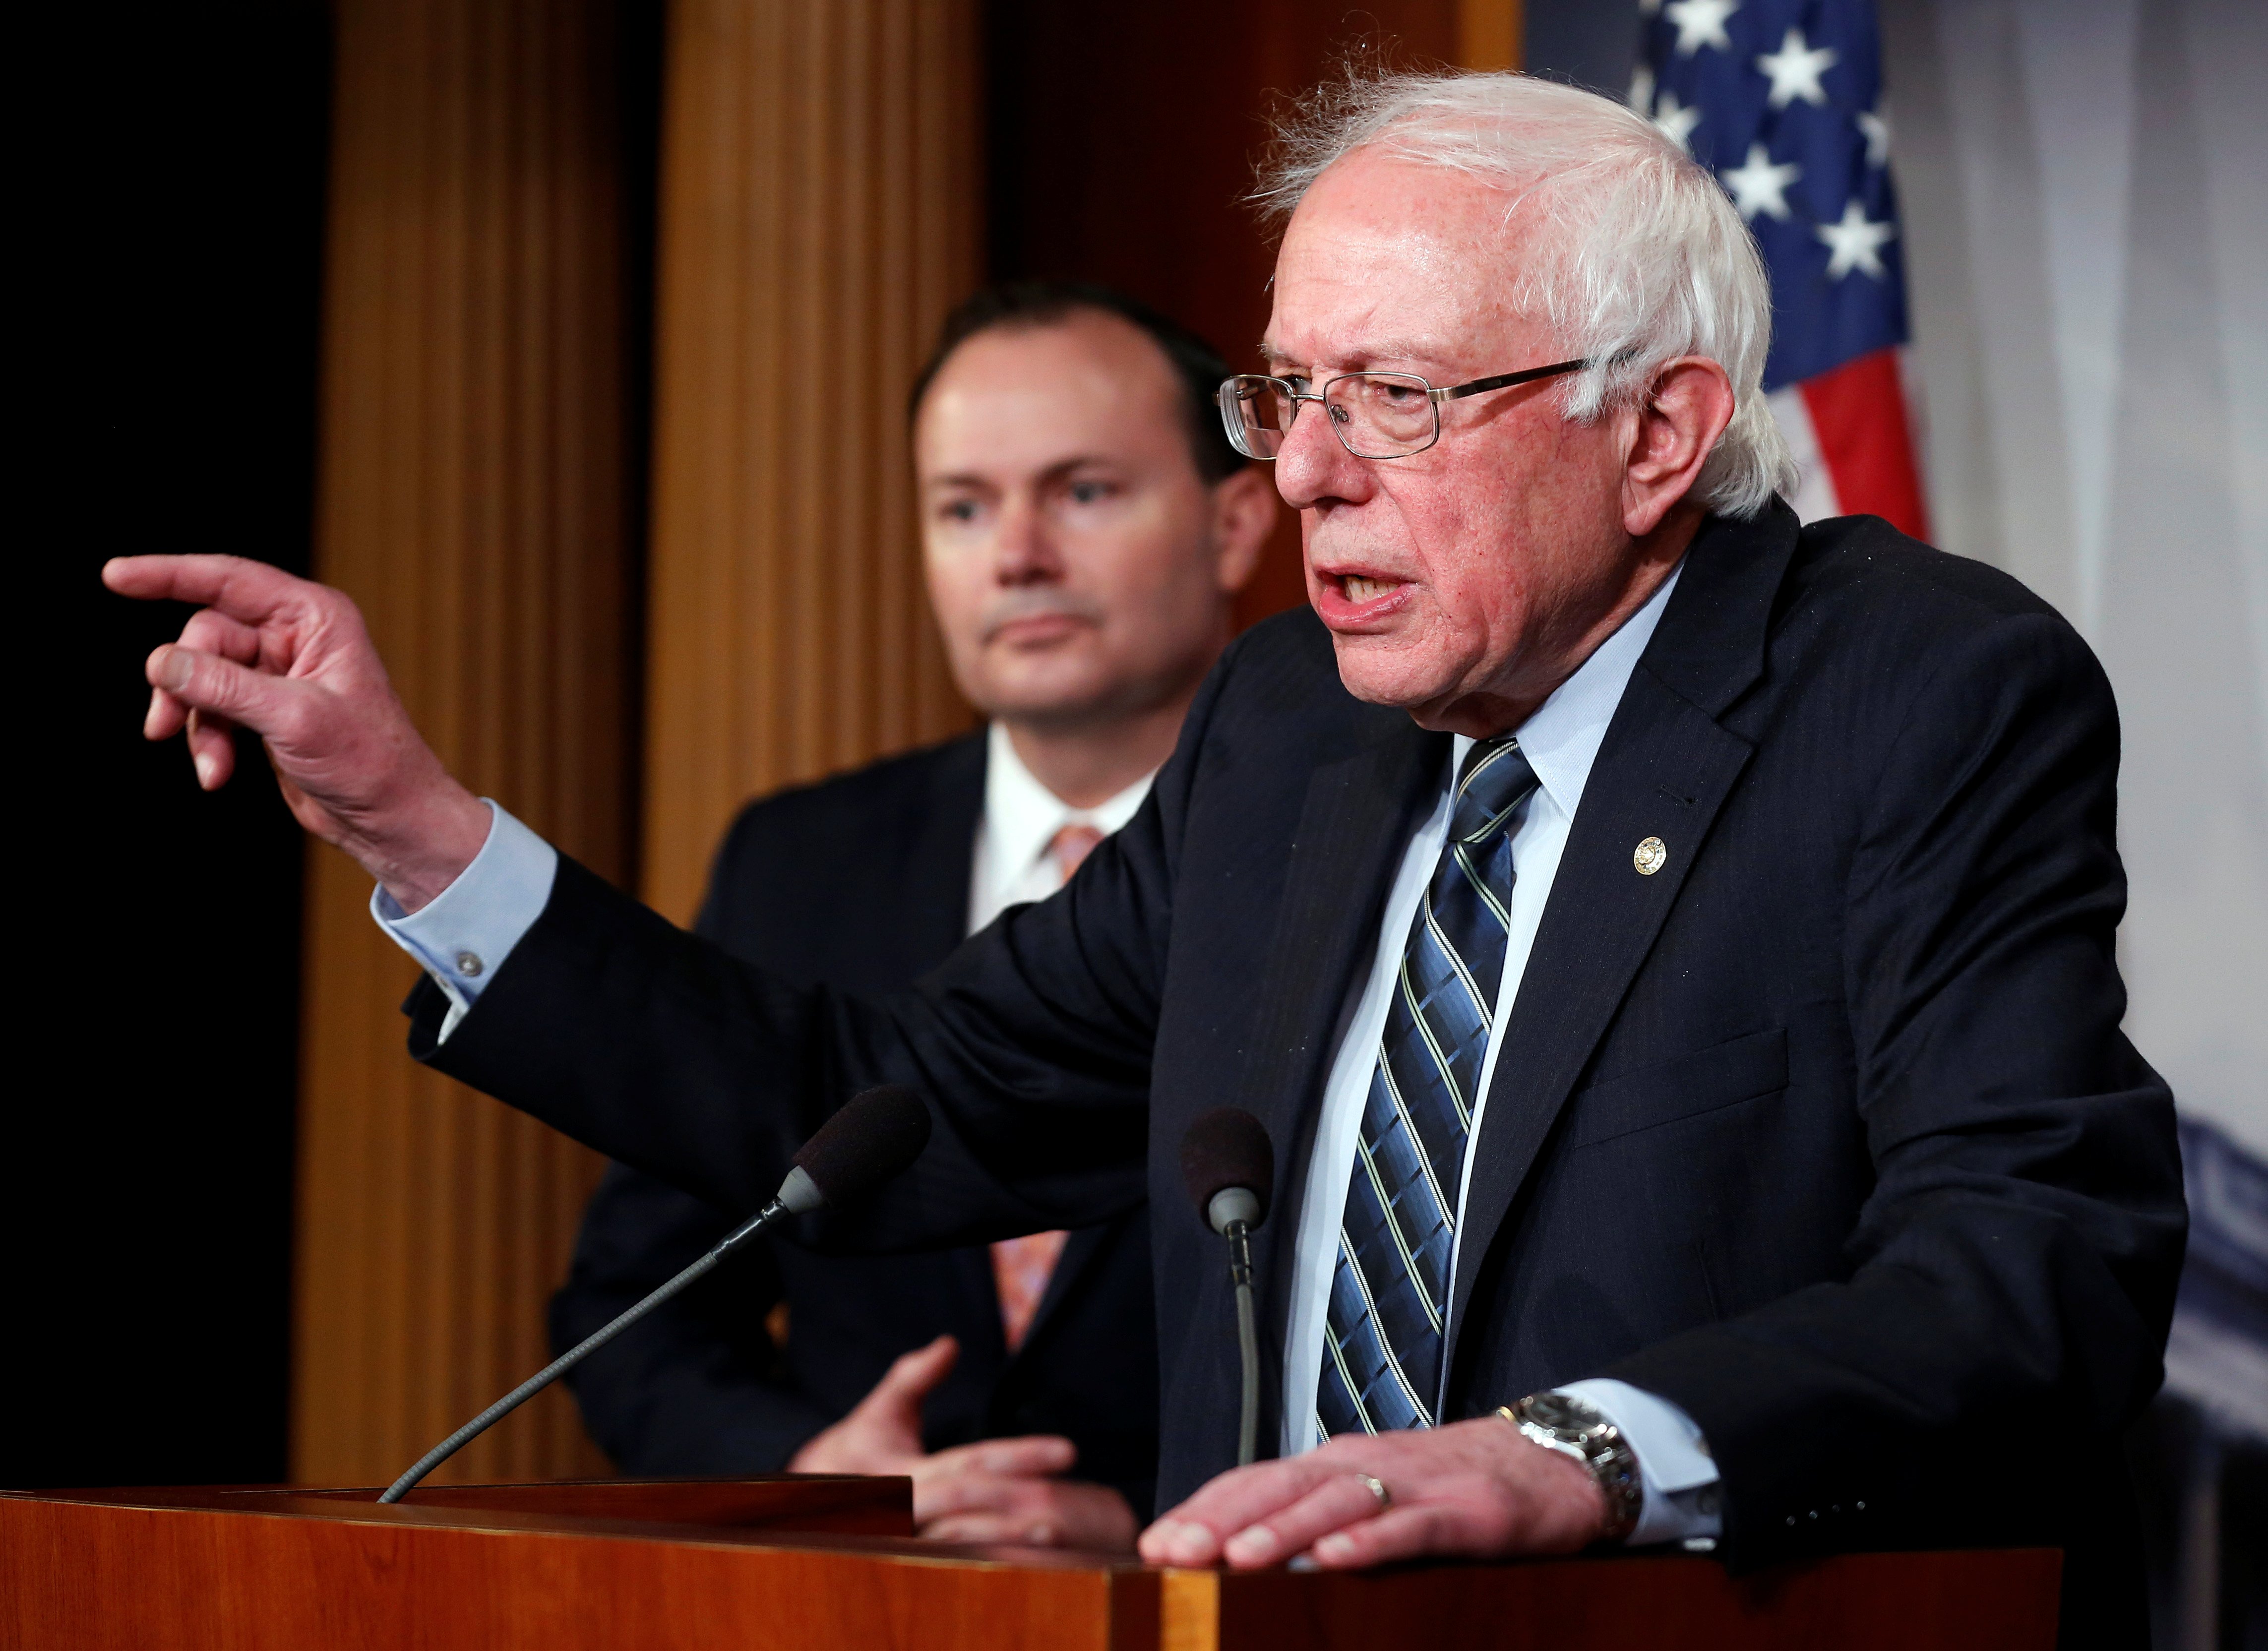 Senator Bernie Sanders (I-VT) speaks after the senate voted on a resolution ending U.S. military support for the war in Yemen on Capitol Hill in Washington